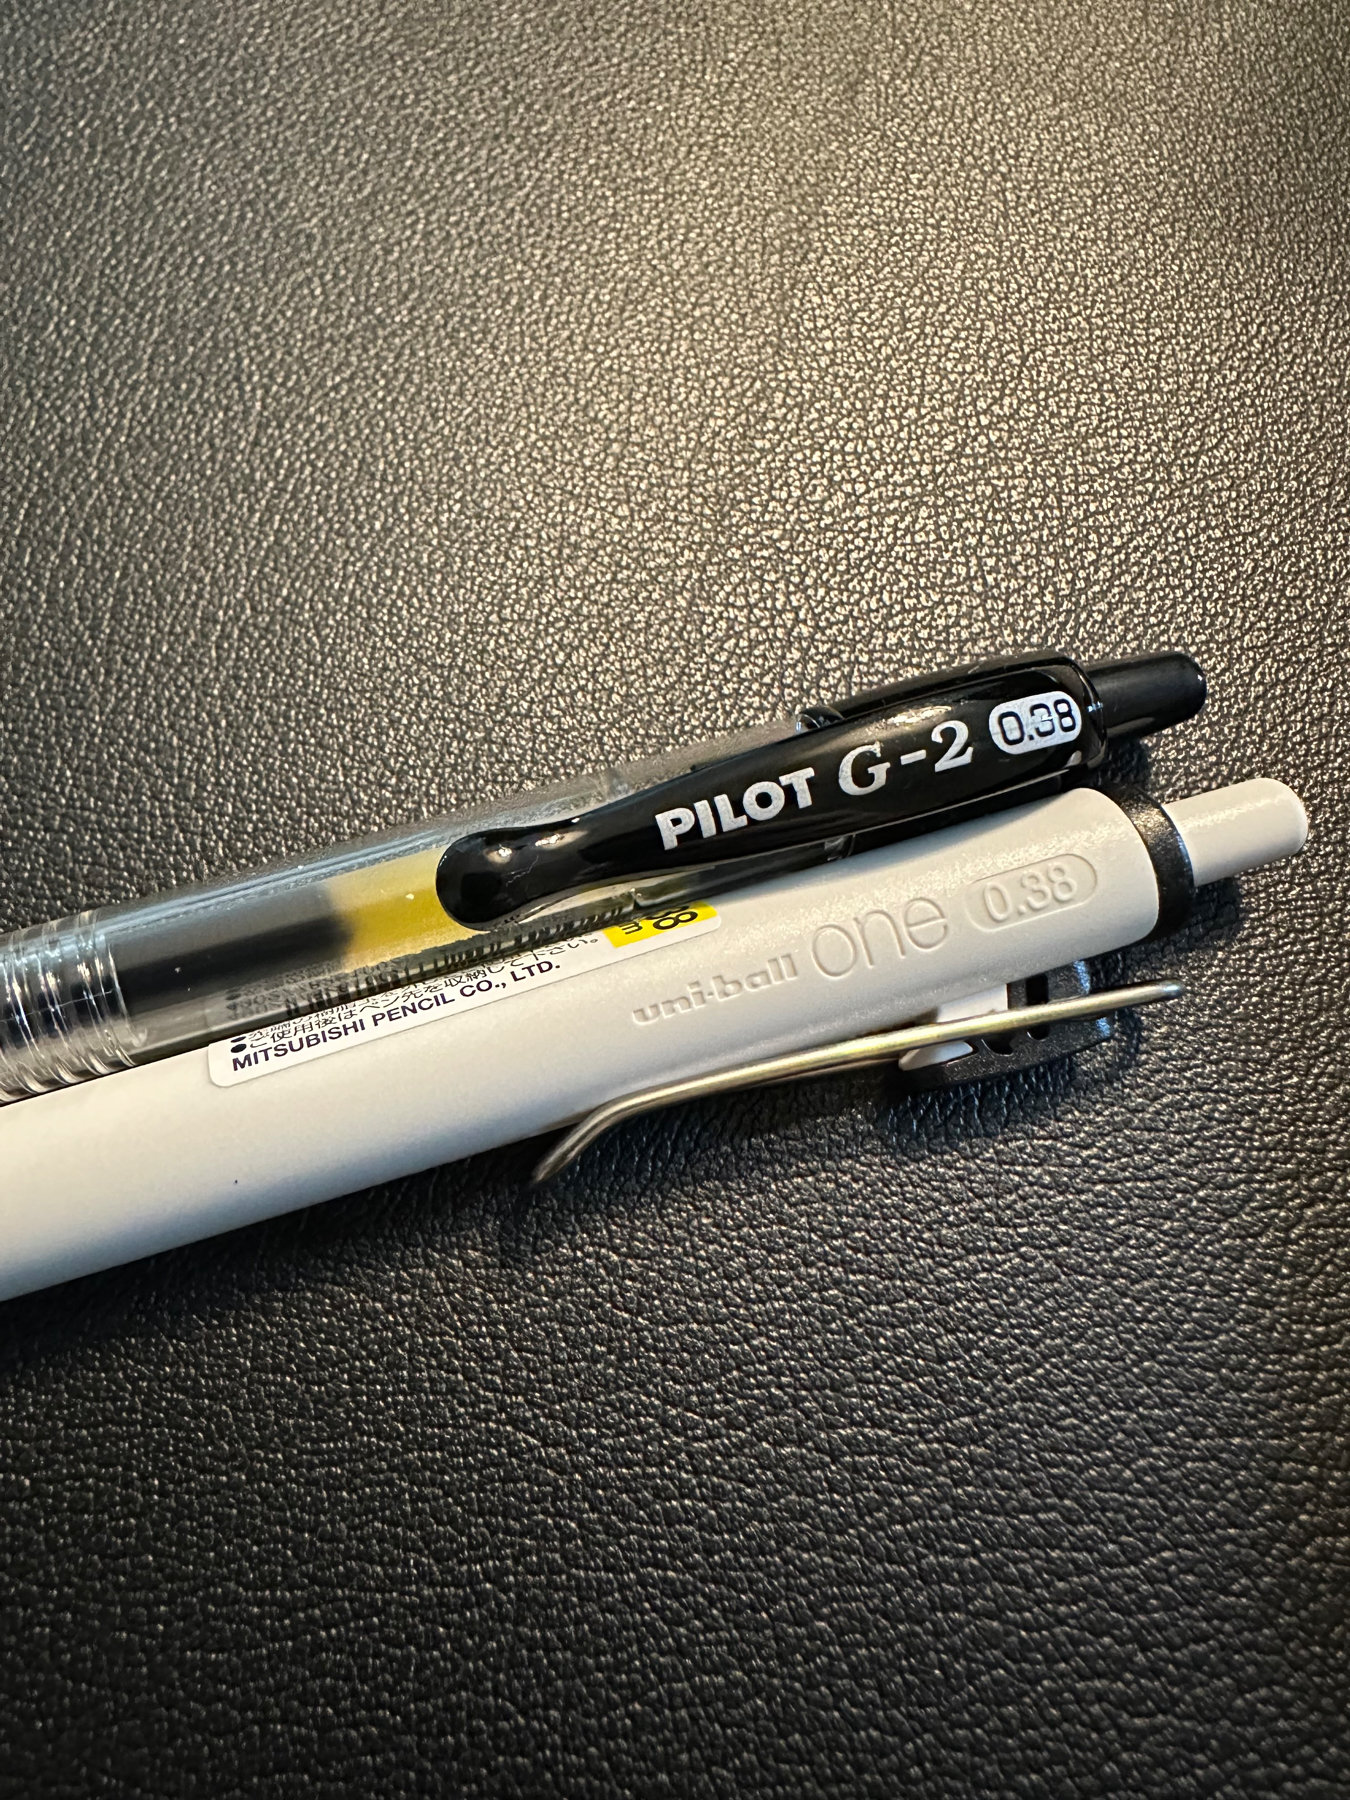 Two pens resting on a textured black surface, the top one is a black Pilot G-2 0.38 and the bottom one is a white Mitsubishi Uniball One 0.38.